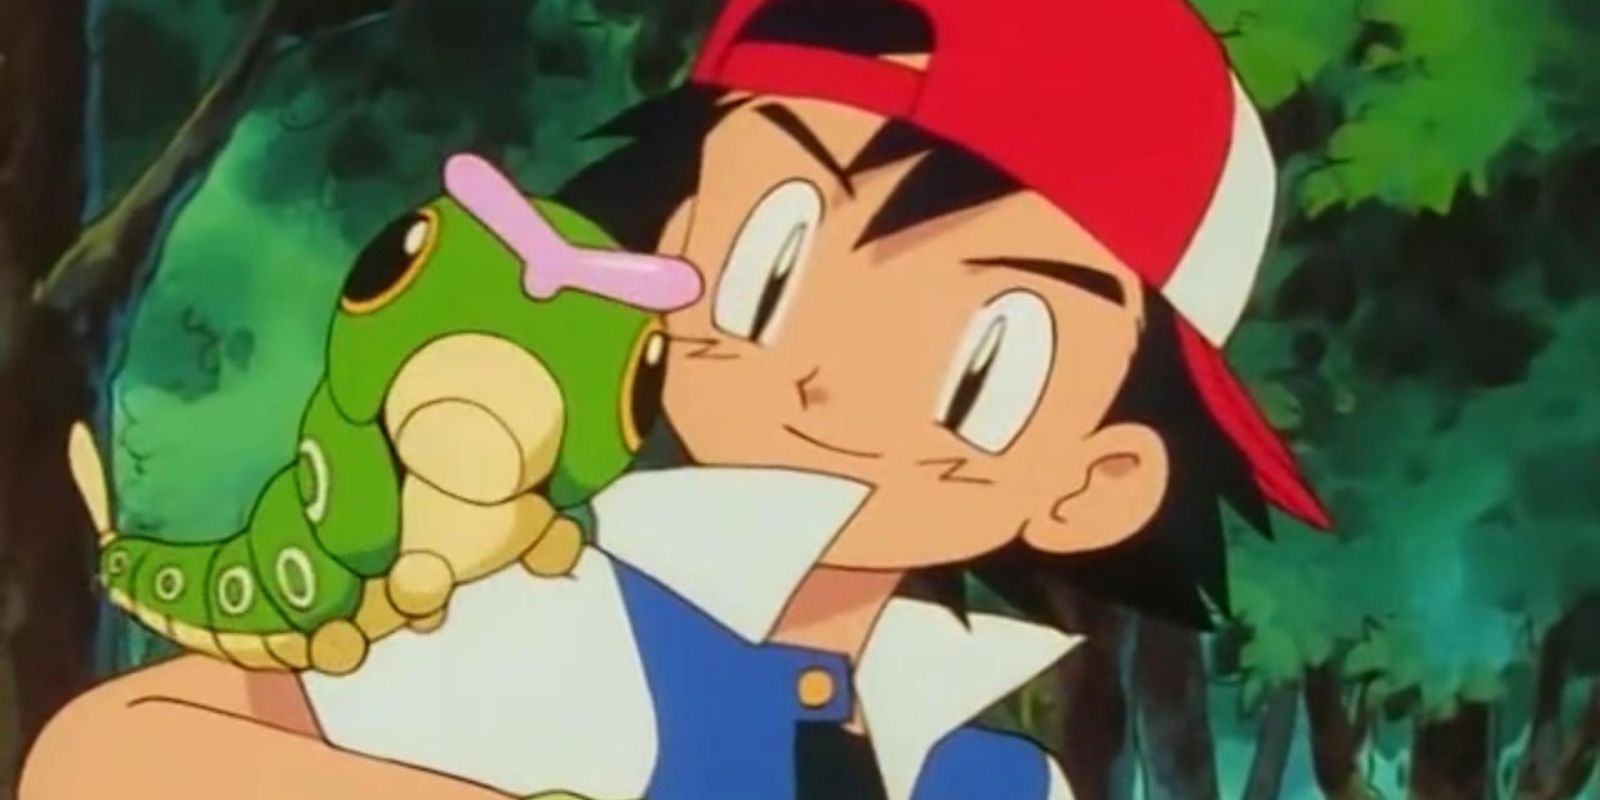 Pokemon caterpie on Ash Ketchum's shoulders in the anime